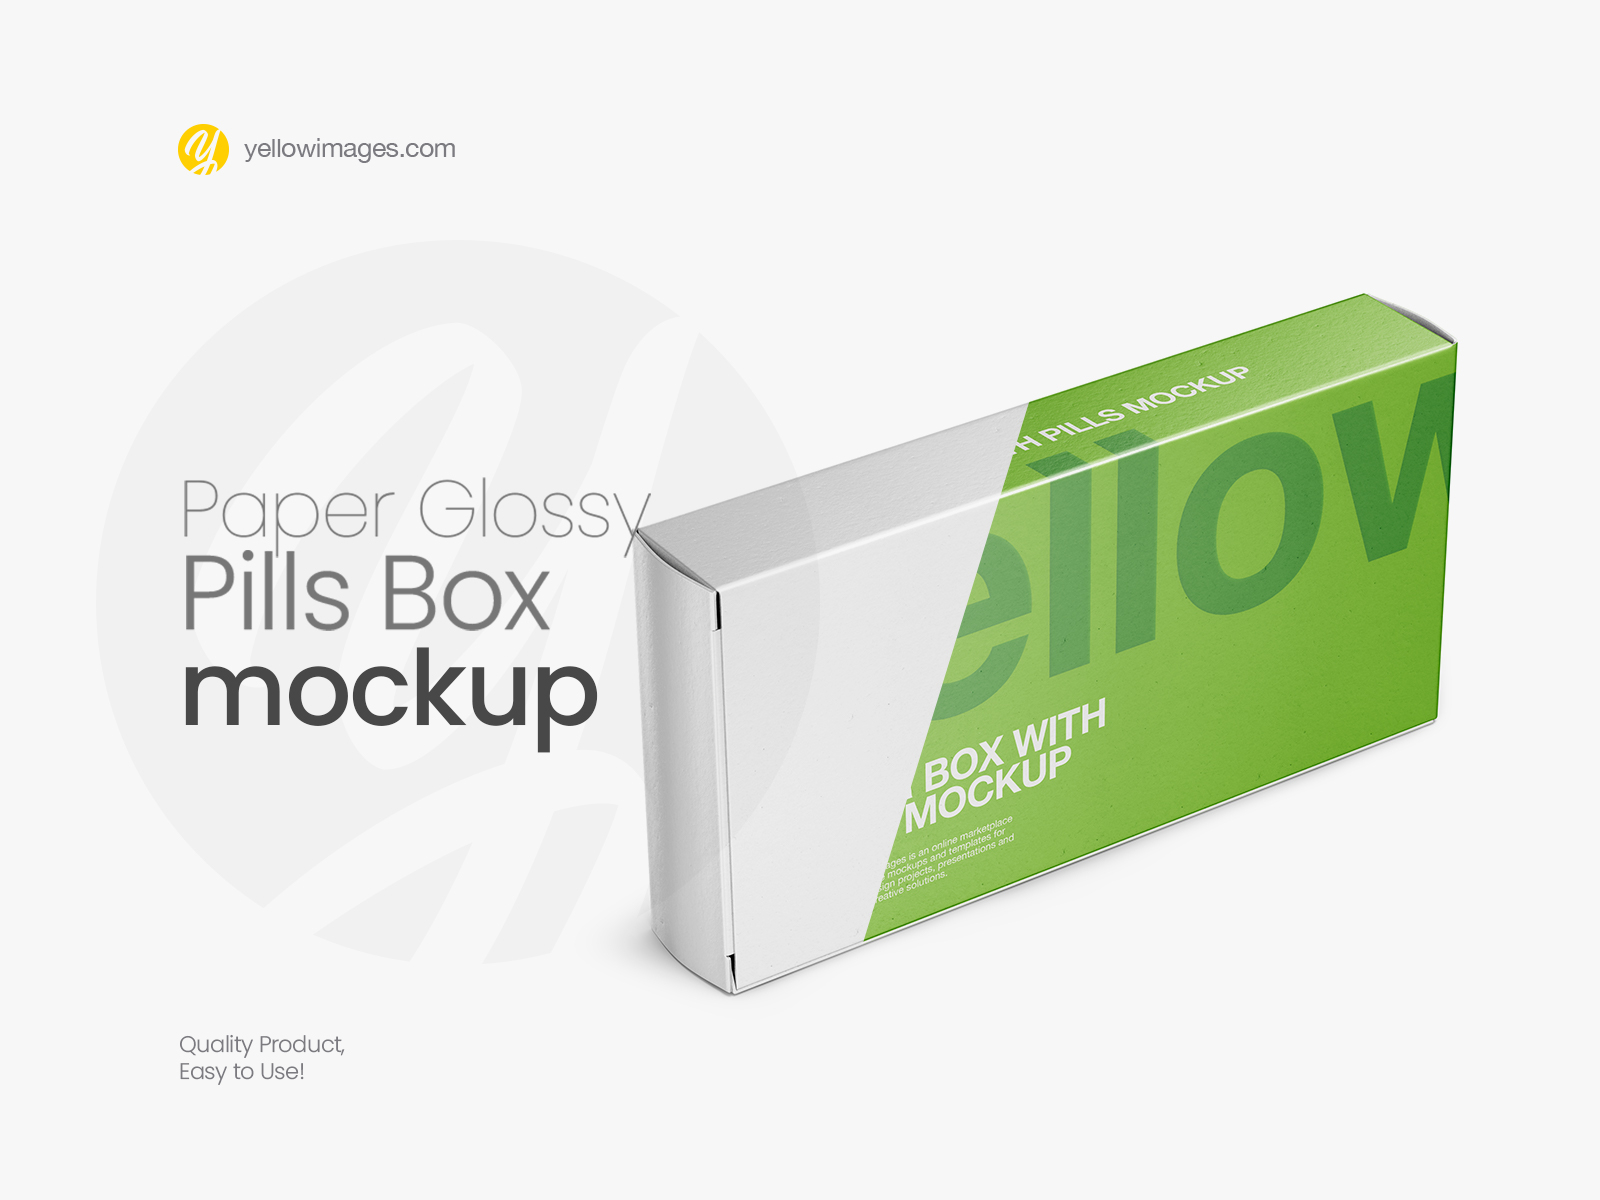 Download Quality Carton Packaging Co Download Free And Premium Psd Mockup Templates